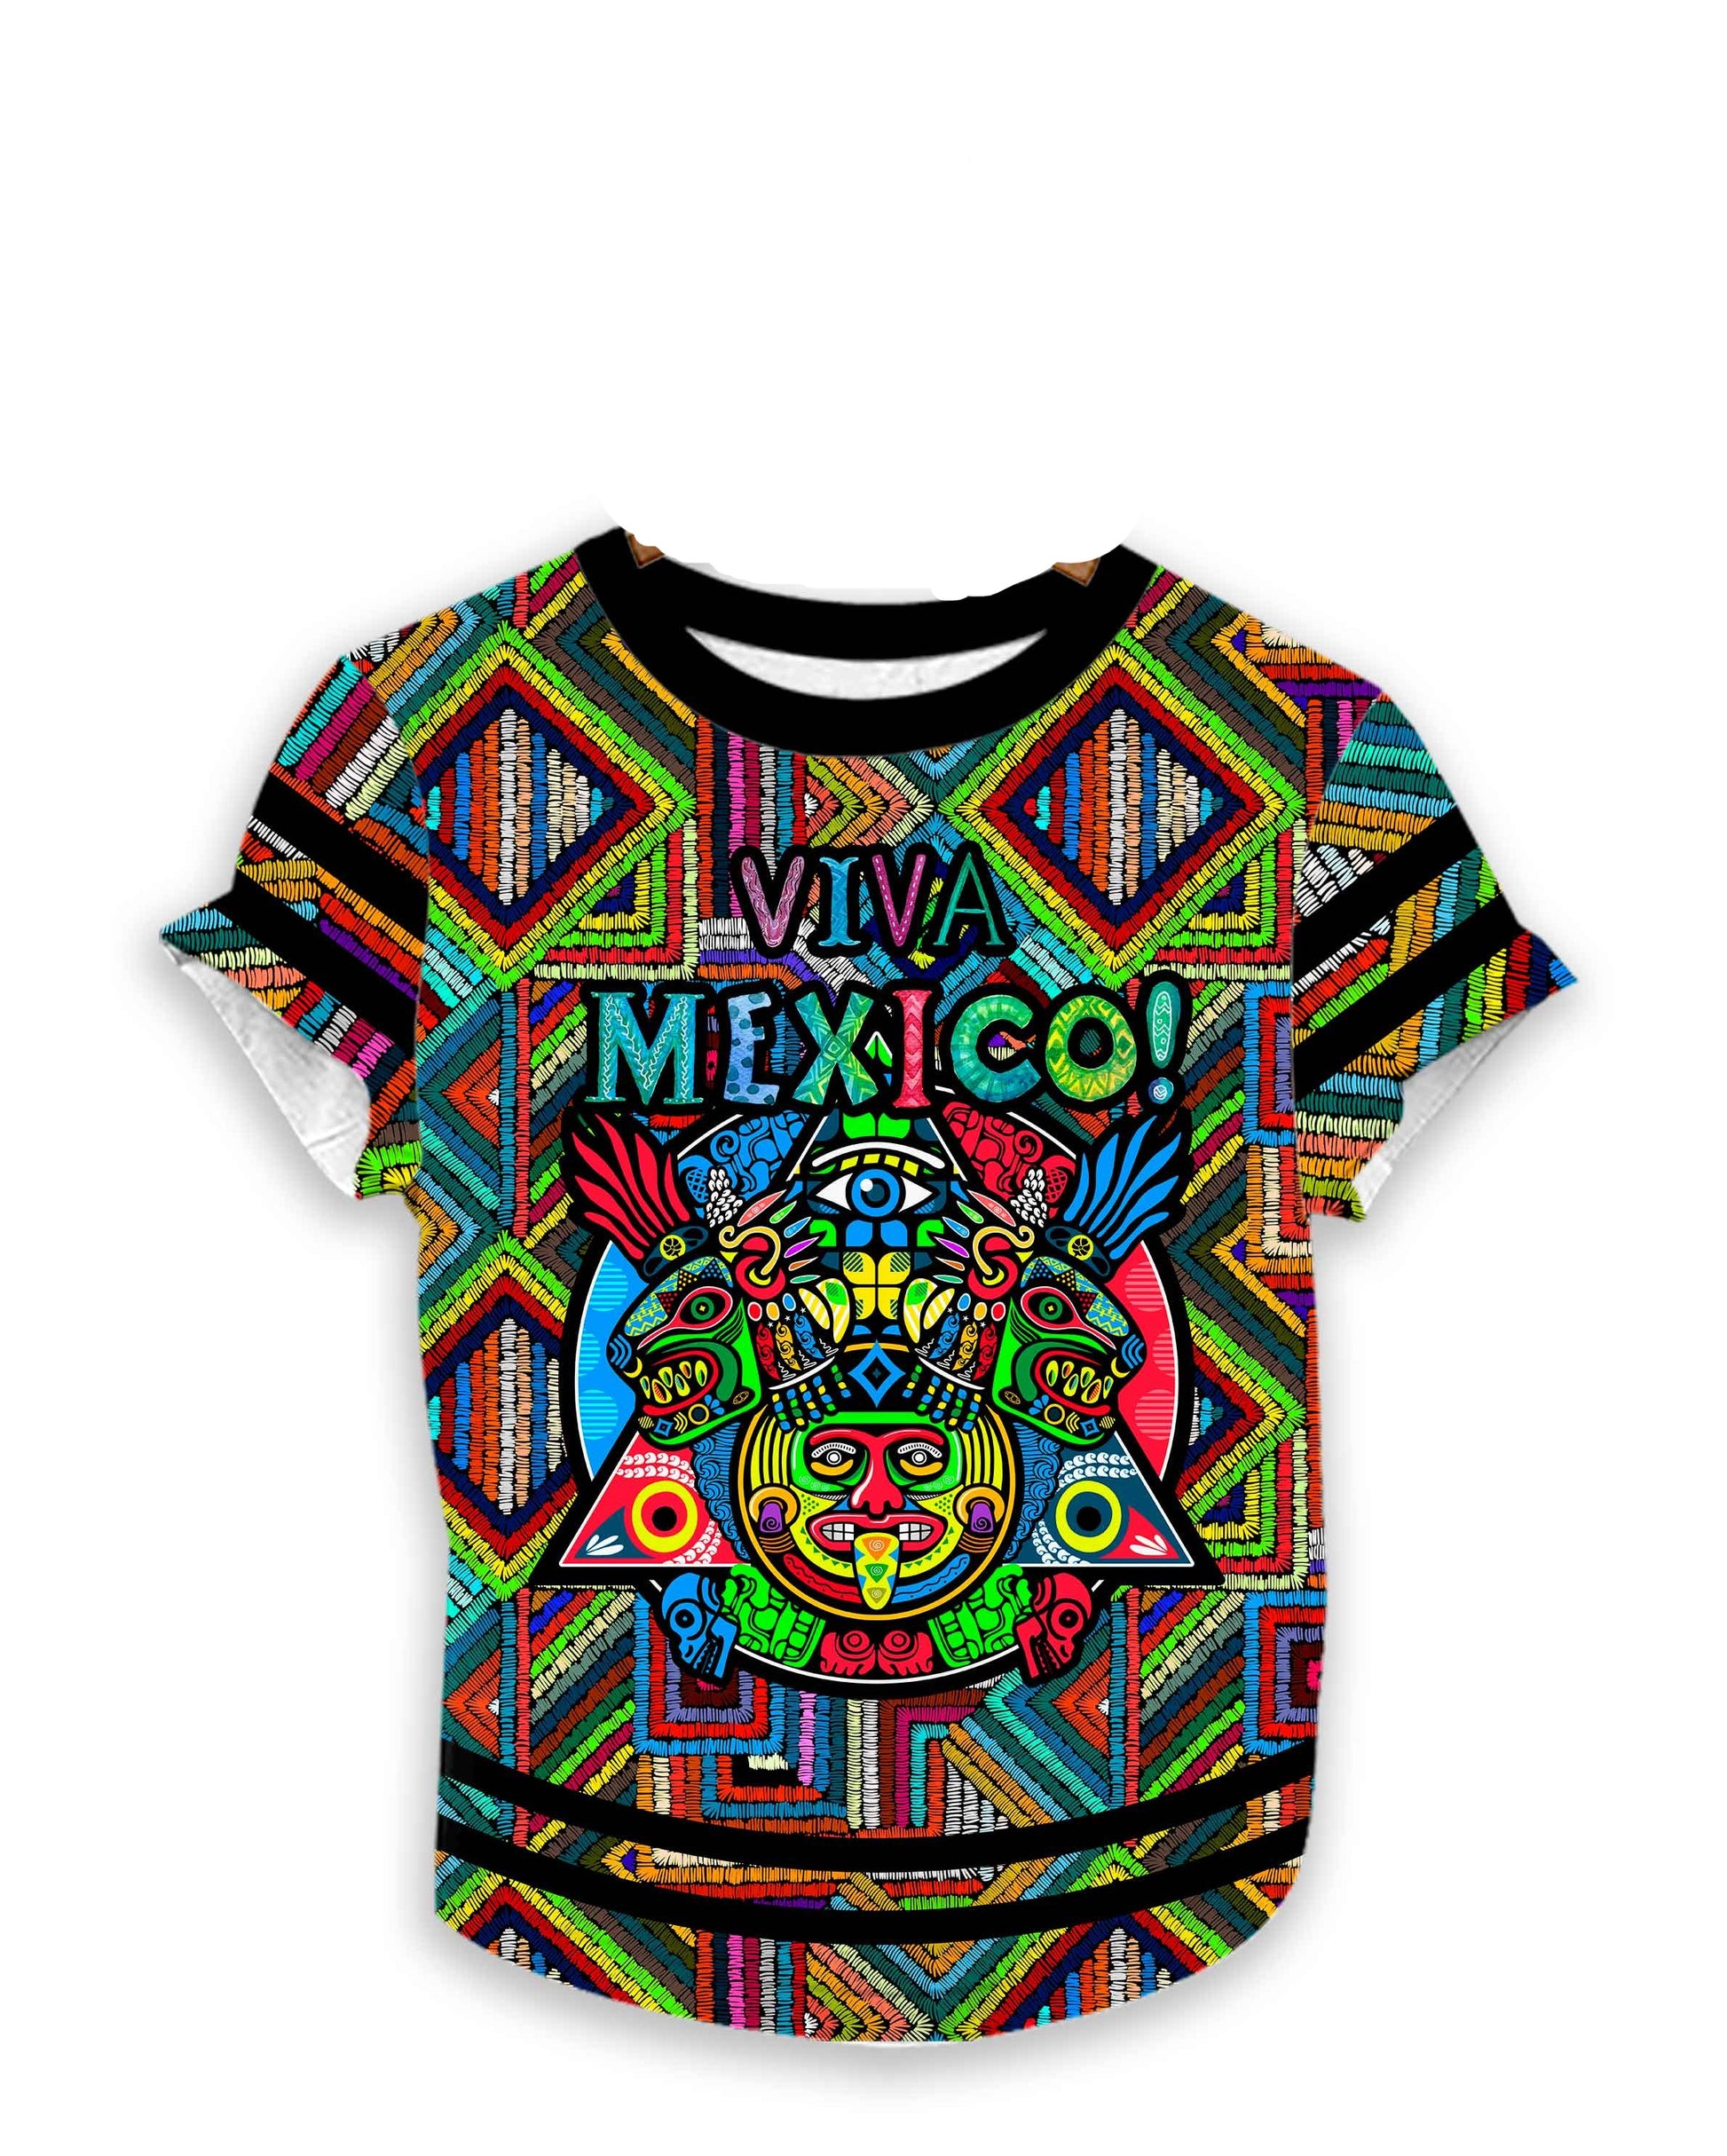 Viva Mexico Colorful Graphic T-Shirt